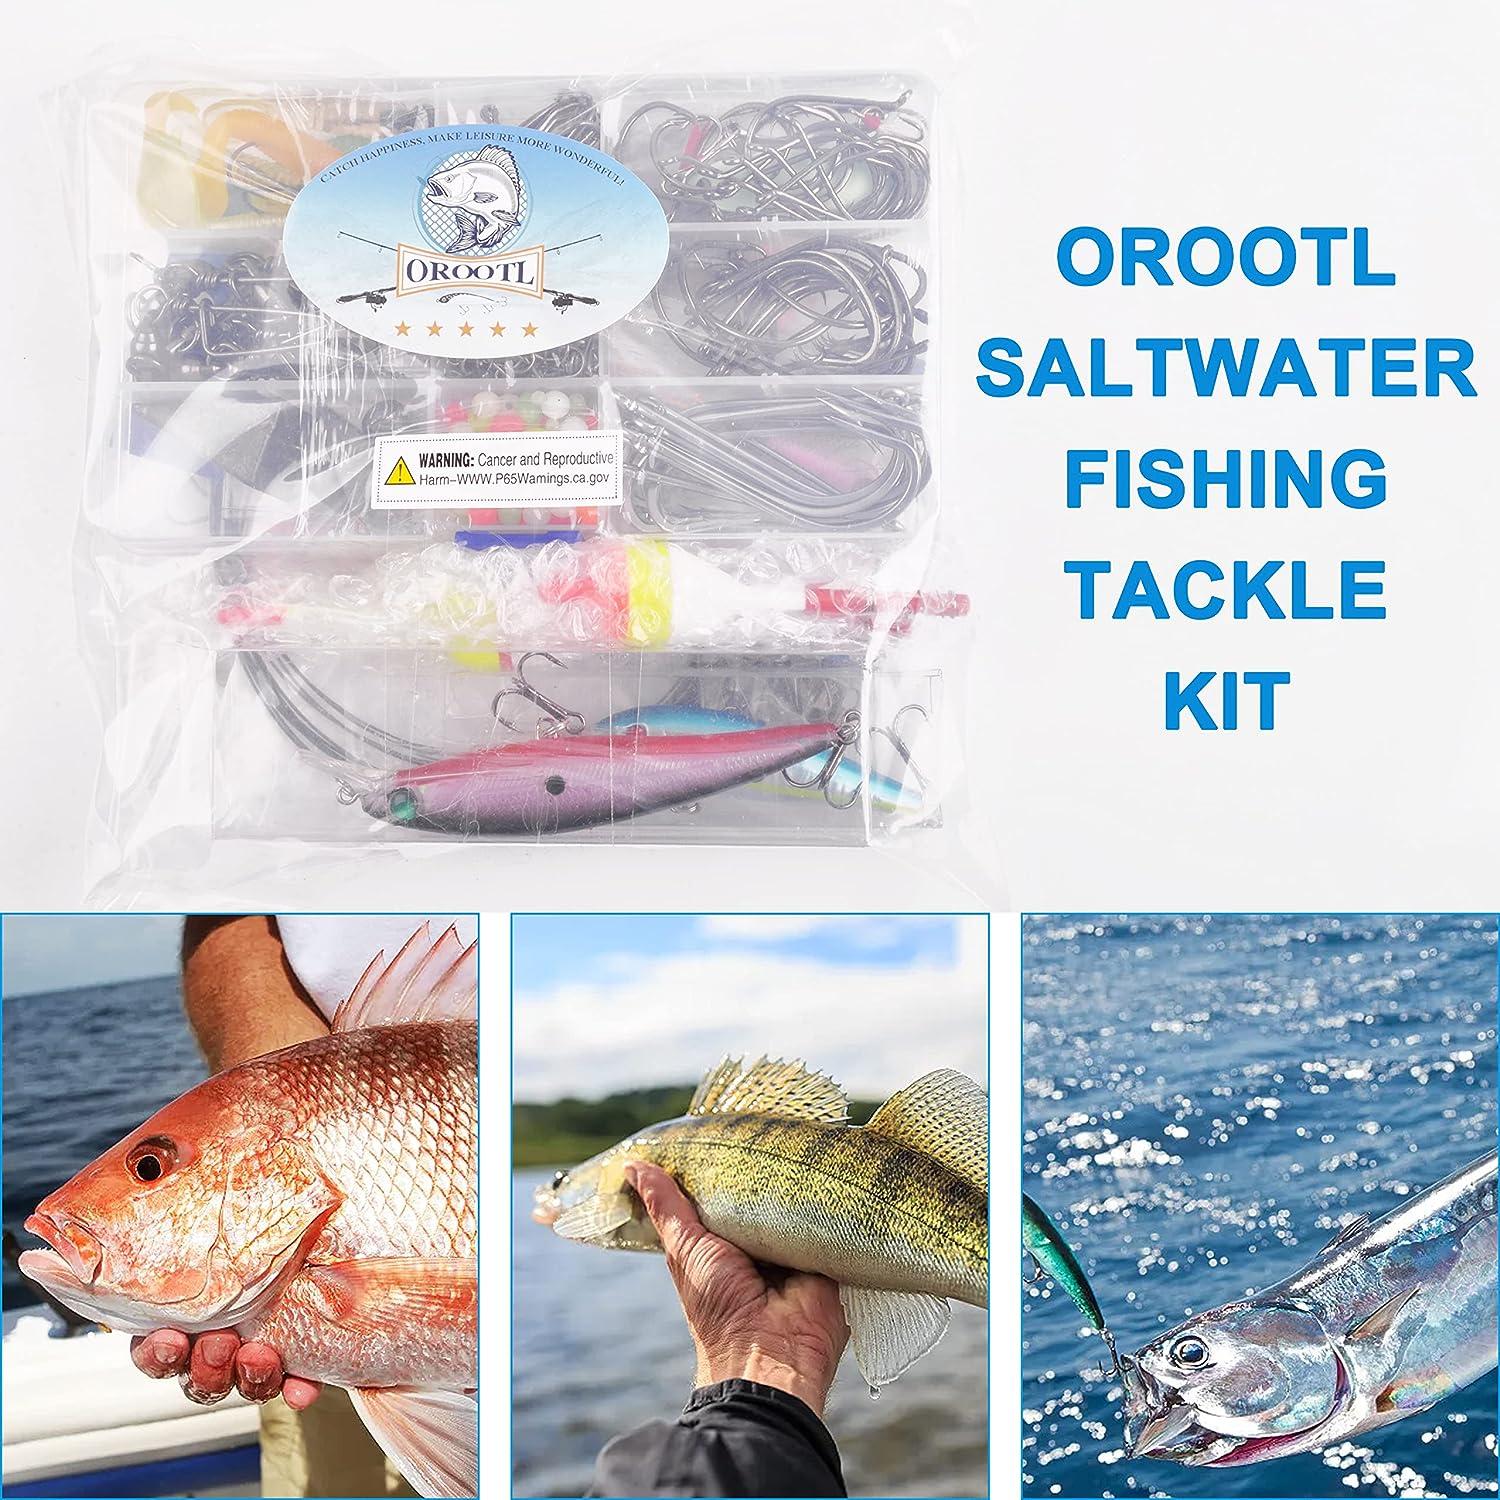 OROOTL Saltwater Fishing Tackle Kit -212pcs Ocean Fishing Tackle Box  Include Fishing Rigs Hooks Minnow Lures Jig Spoons Swivels Snaps Weights  Wire Leaders Floats Beads Surf Fishing Gear Accessories